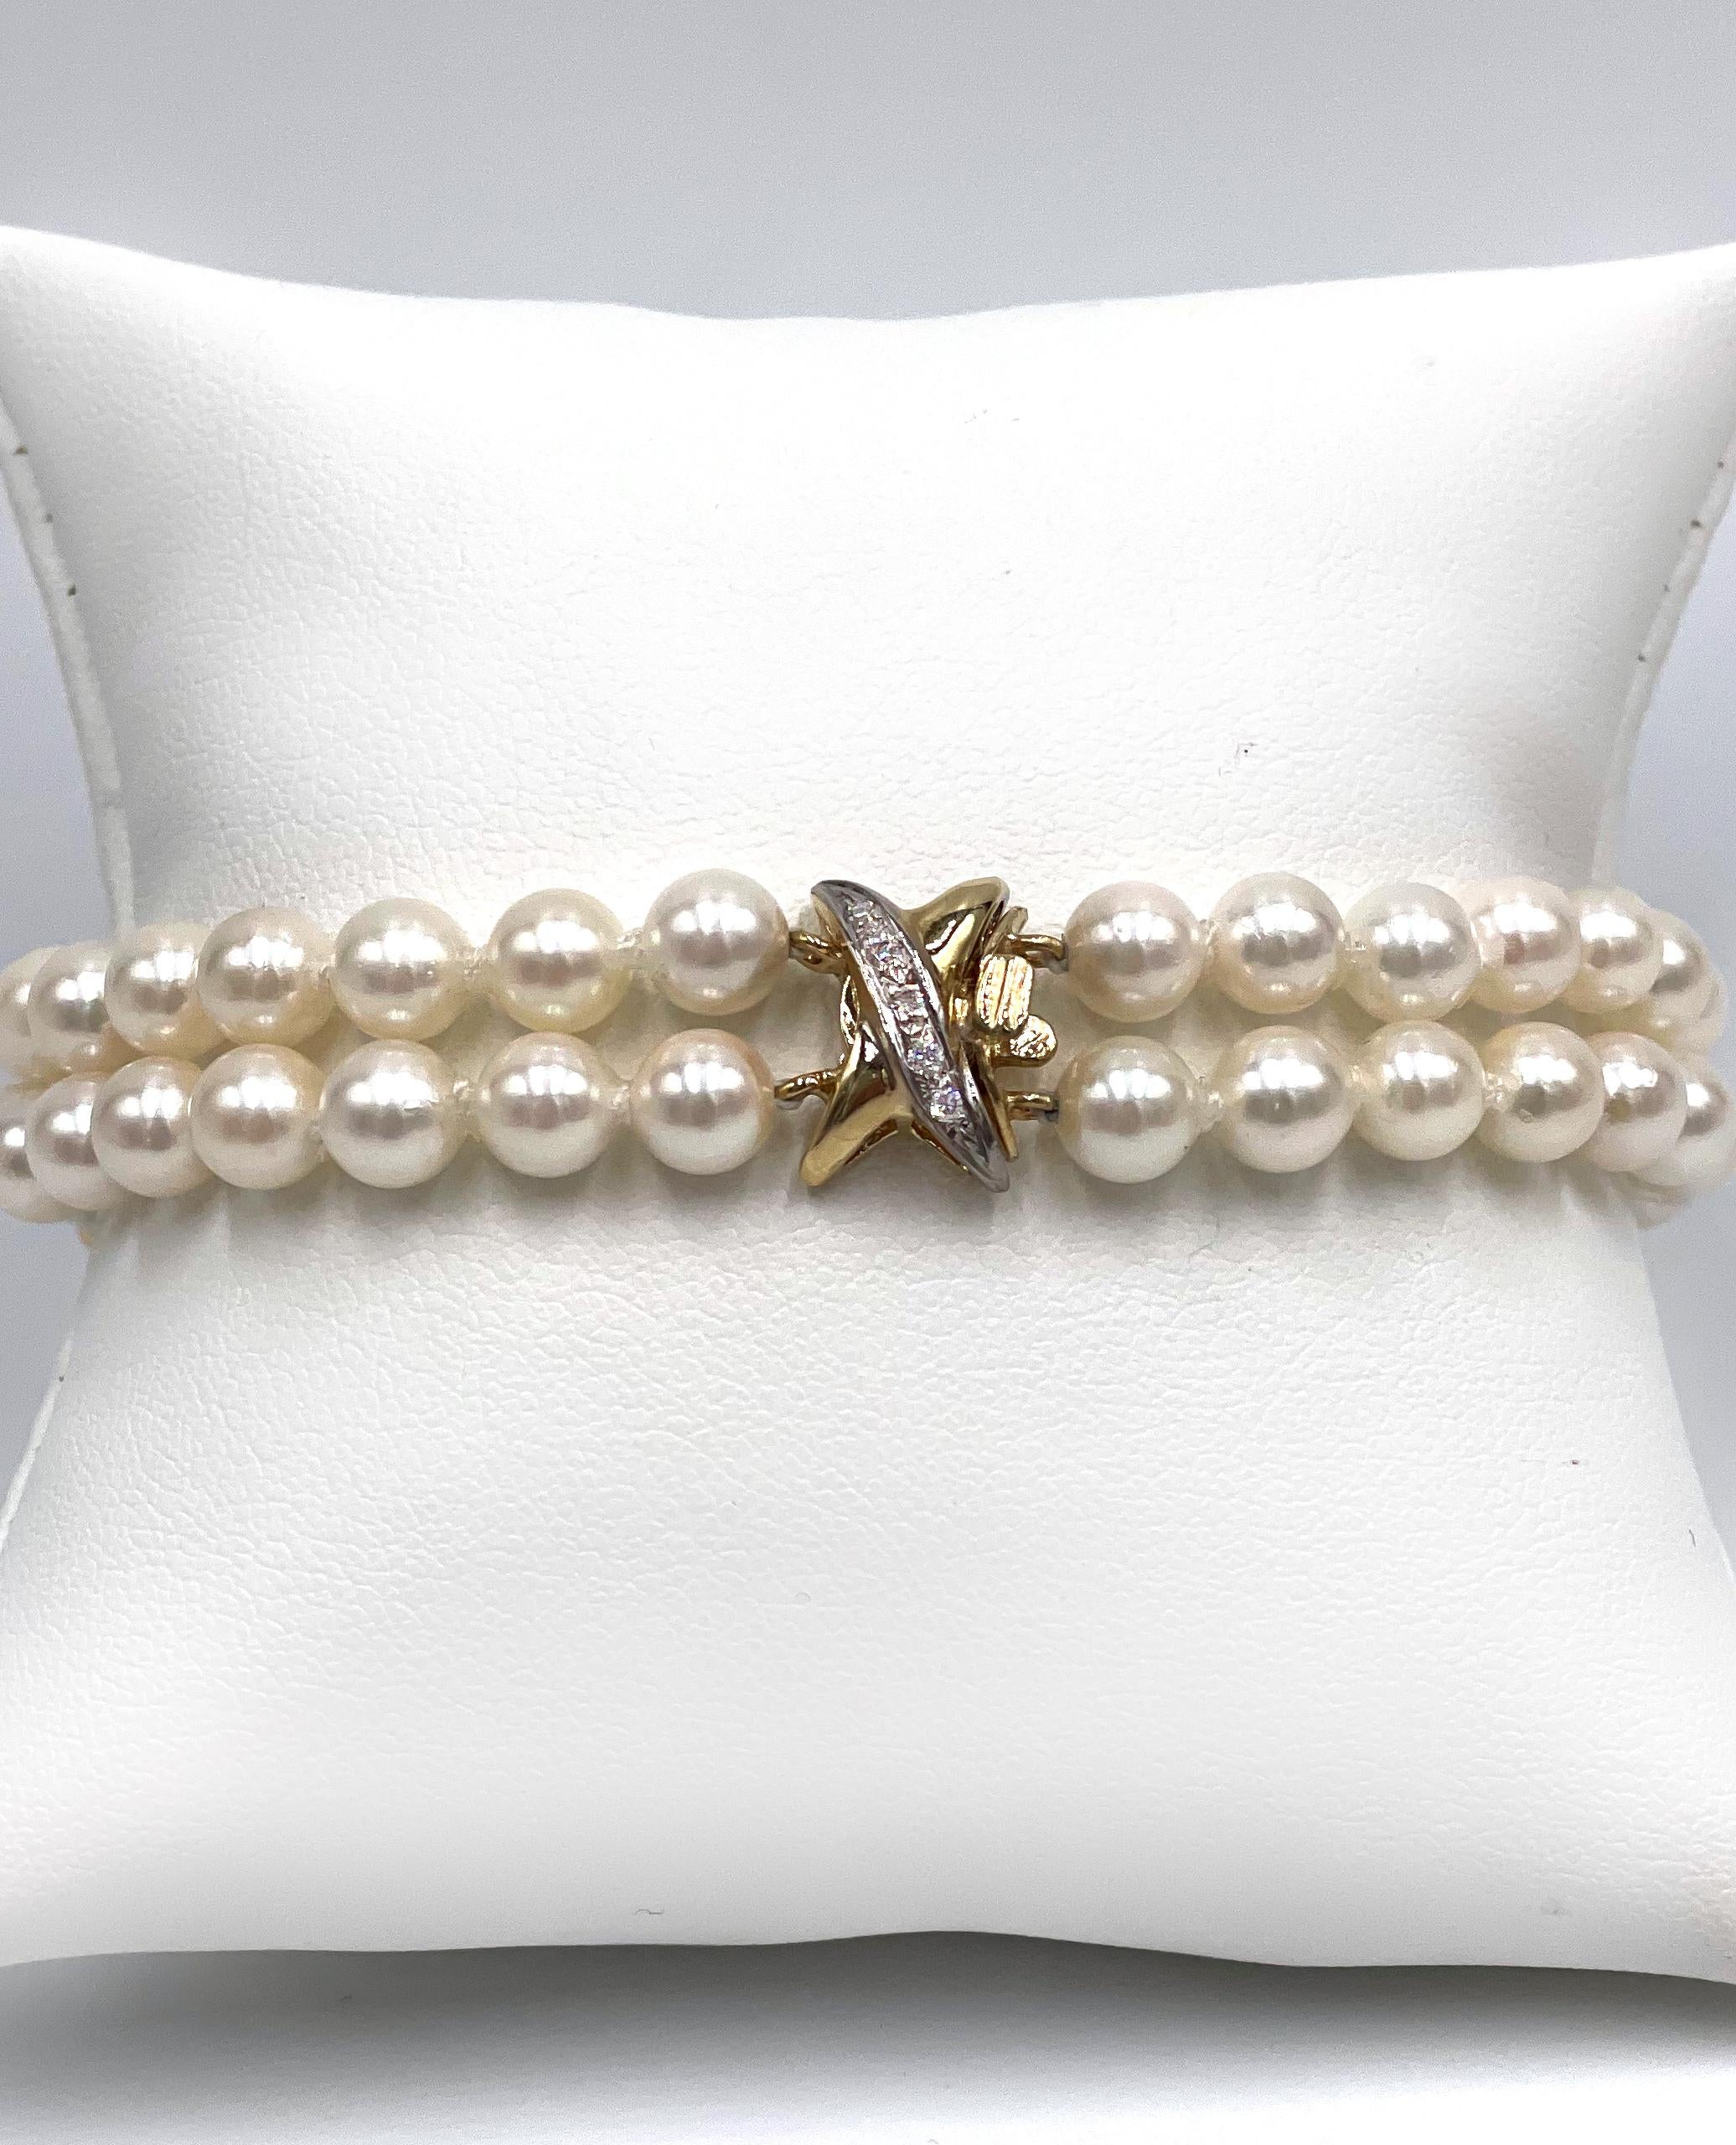 Contemporary Double Strand Cultured Pearl Bracelet with 14K Yellow Gold X Clasp with Diamonds